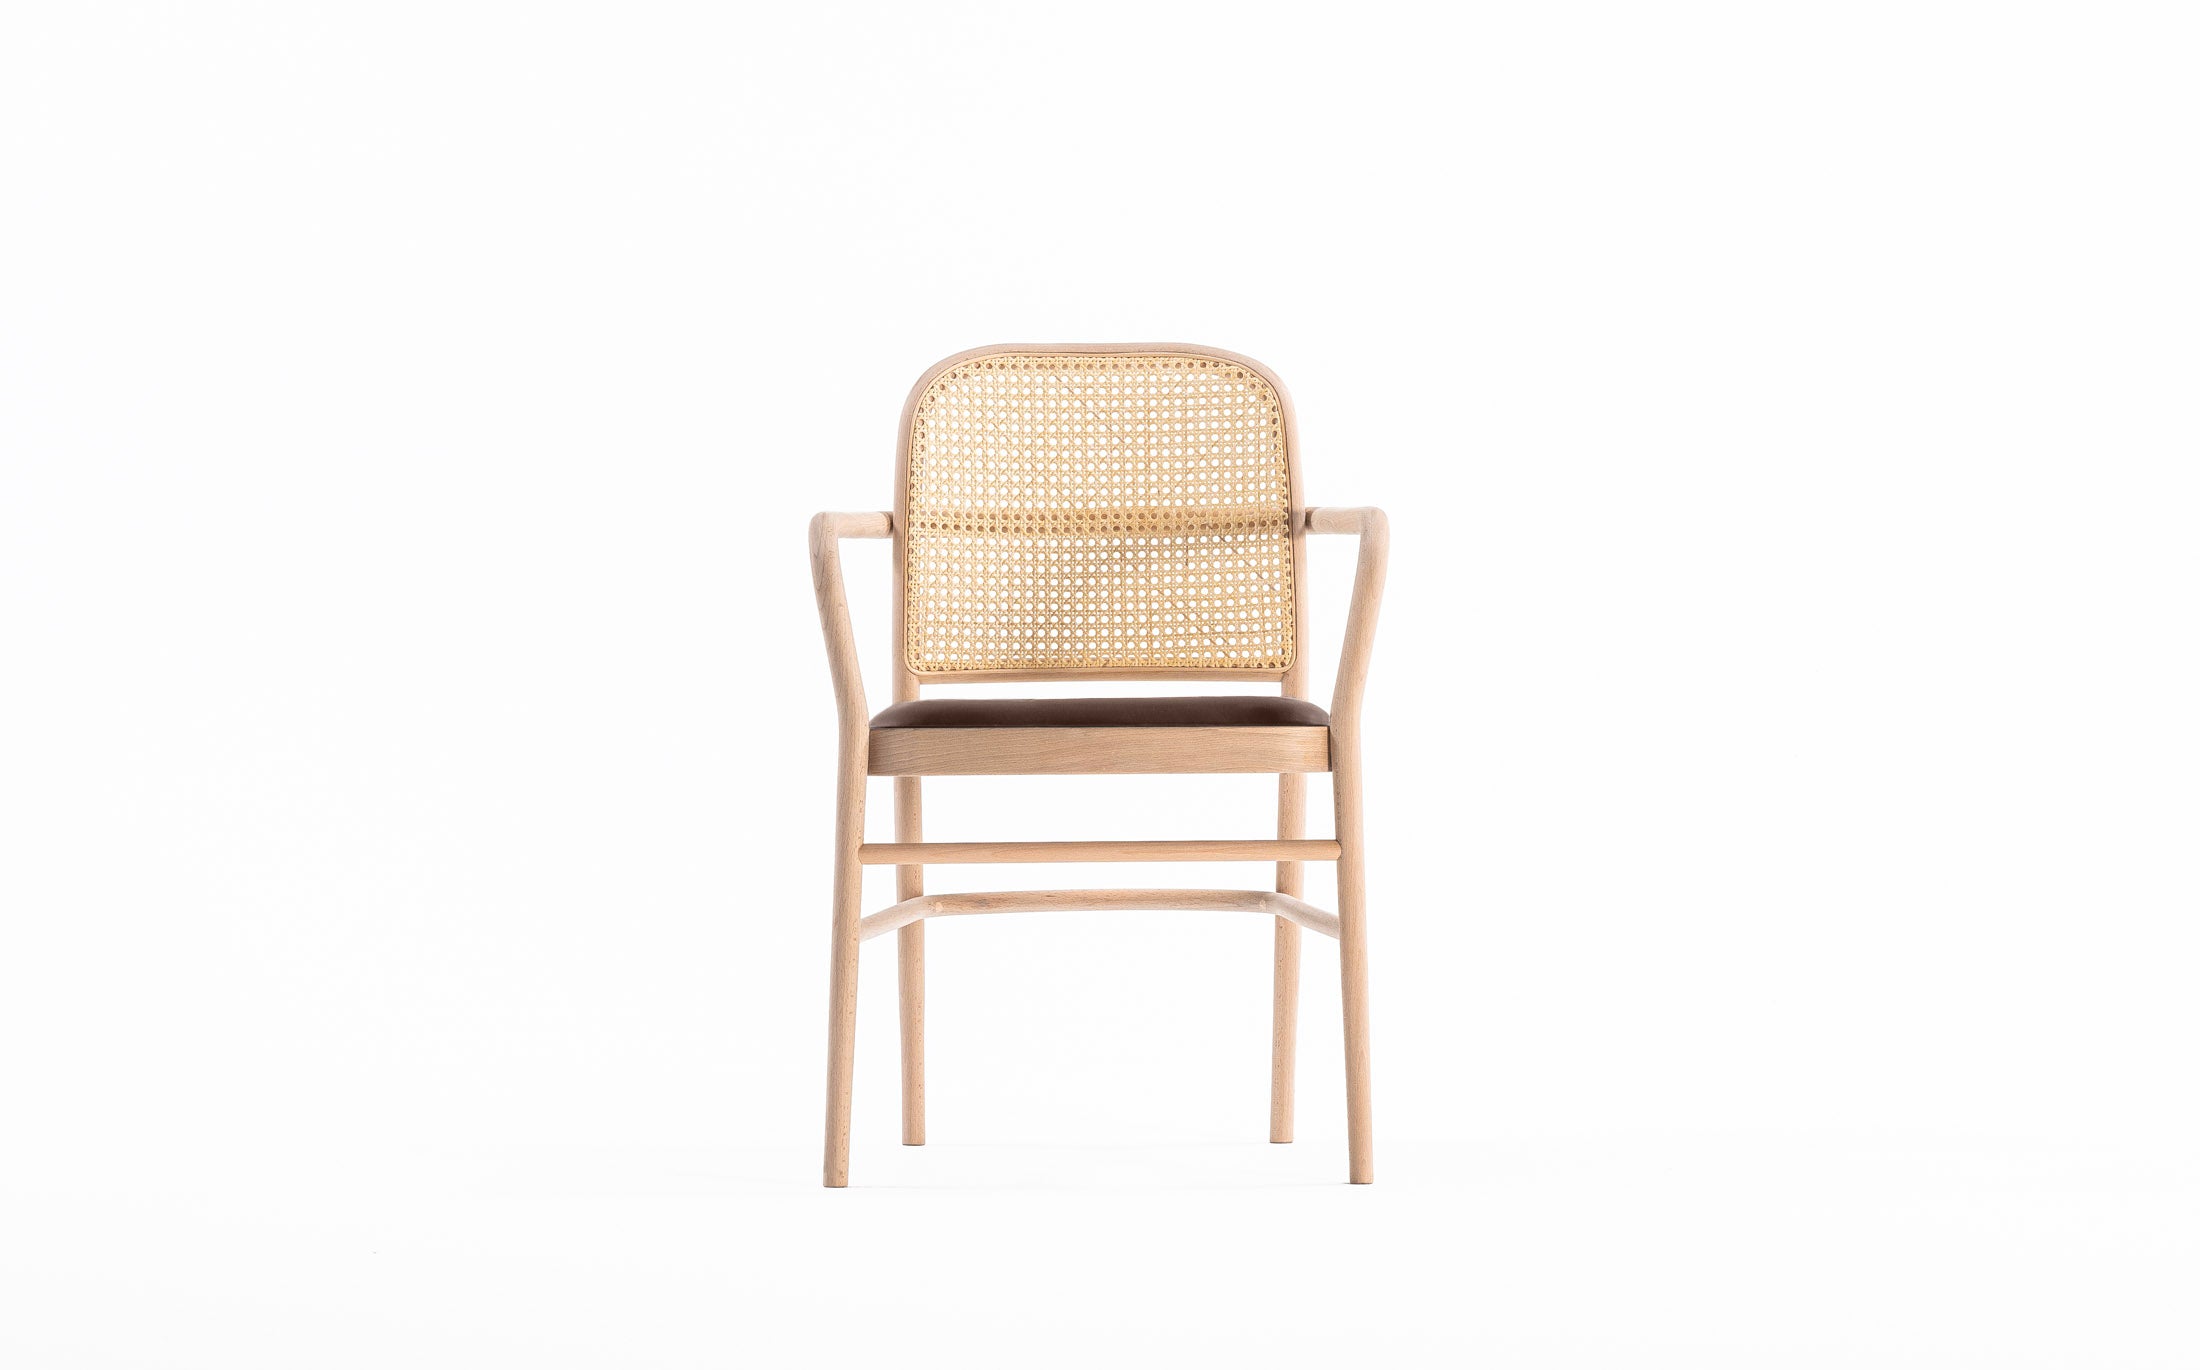 The bent armchair #Seat materials_smooth leather 40103